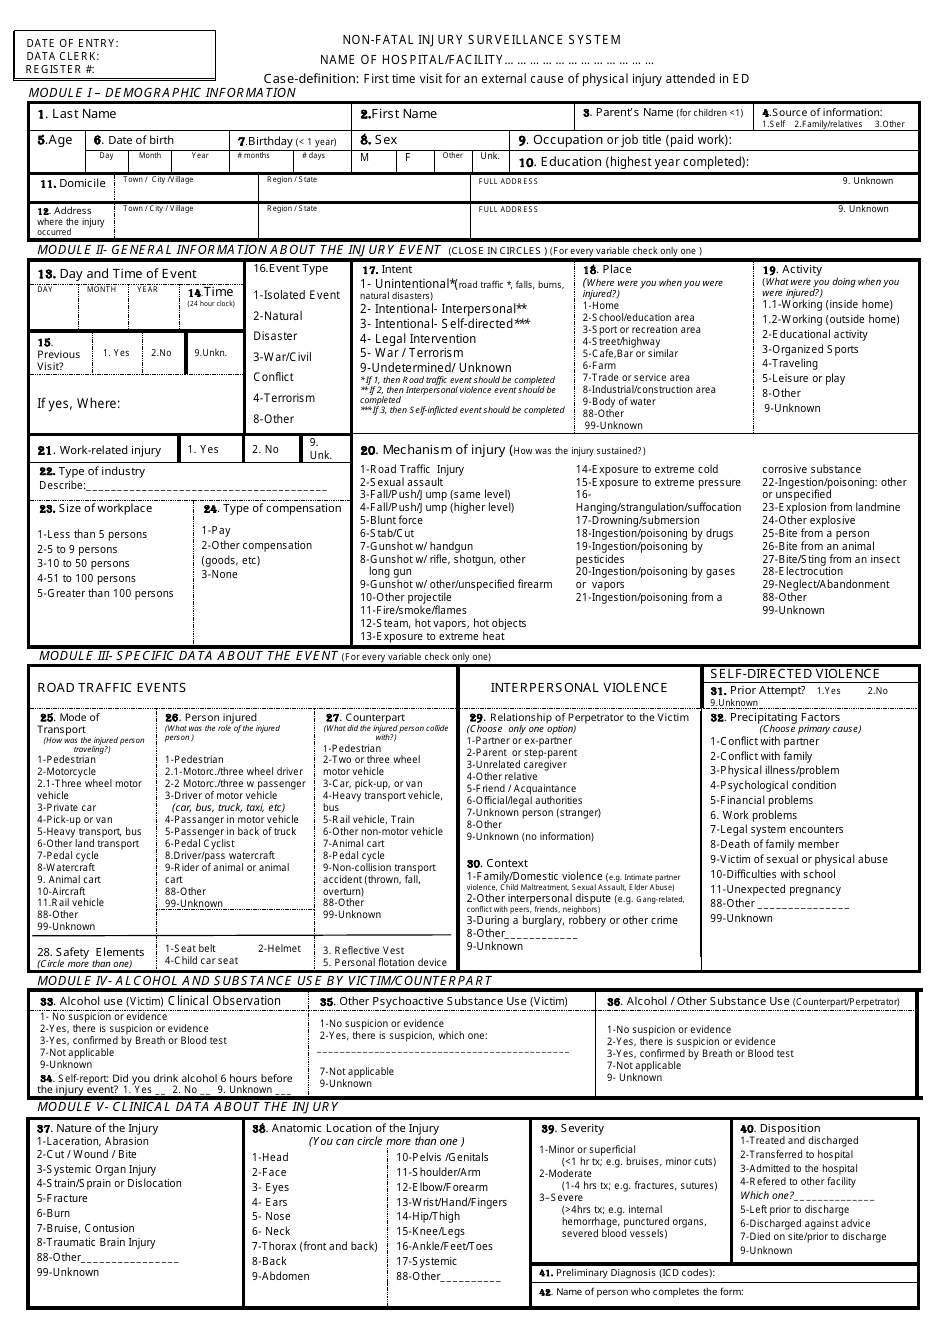 Medical Record Form - Non-fatal Injury Surveillance System, Page 1